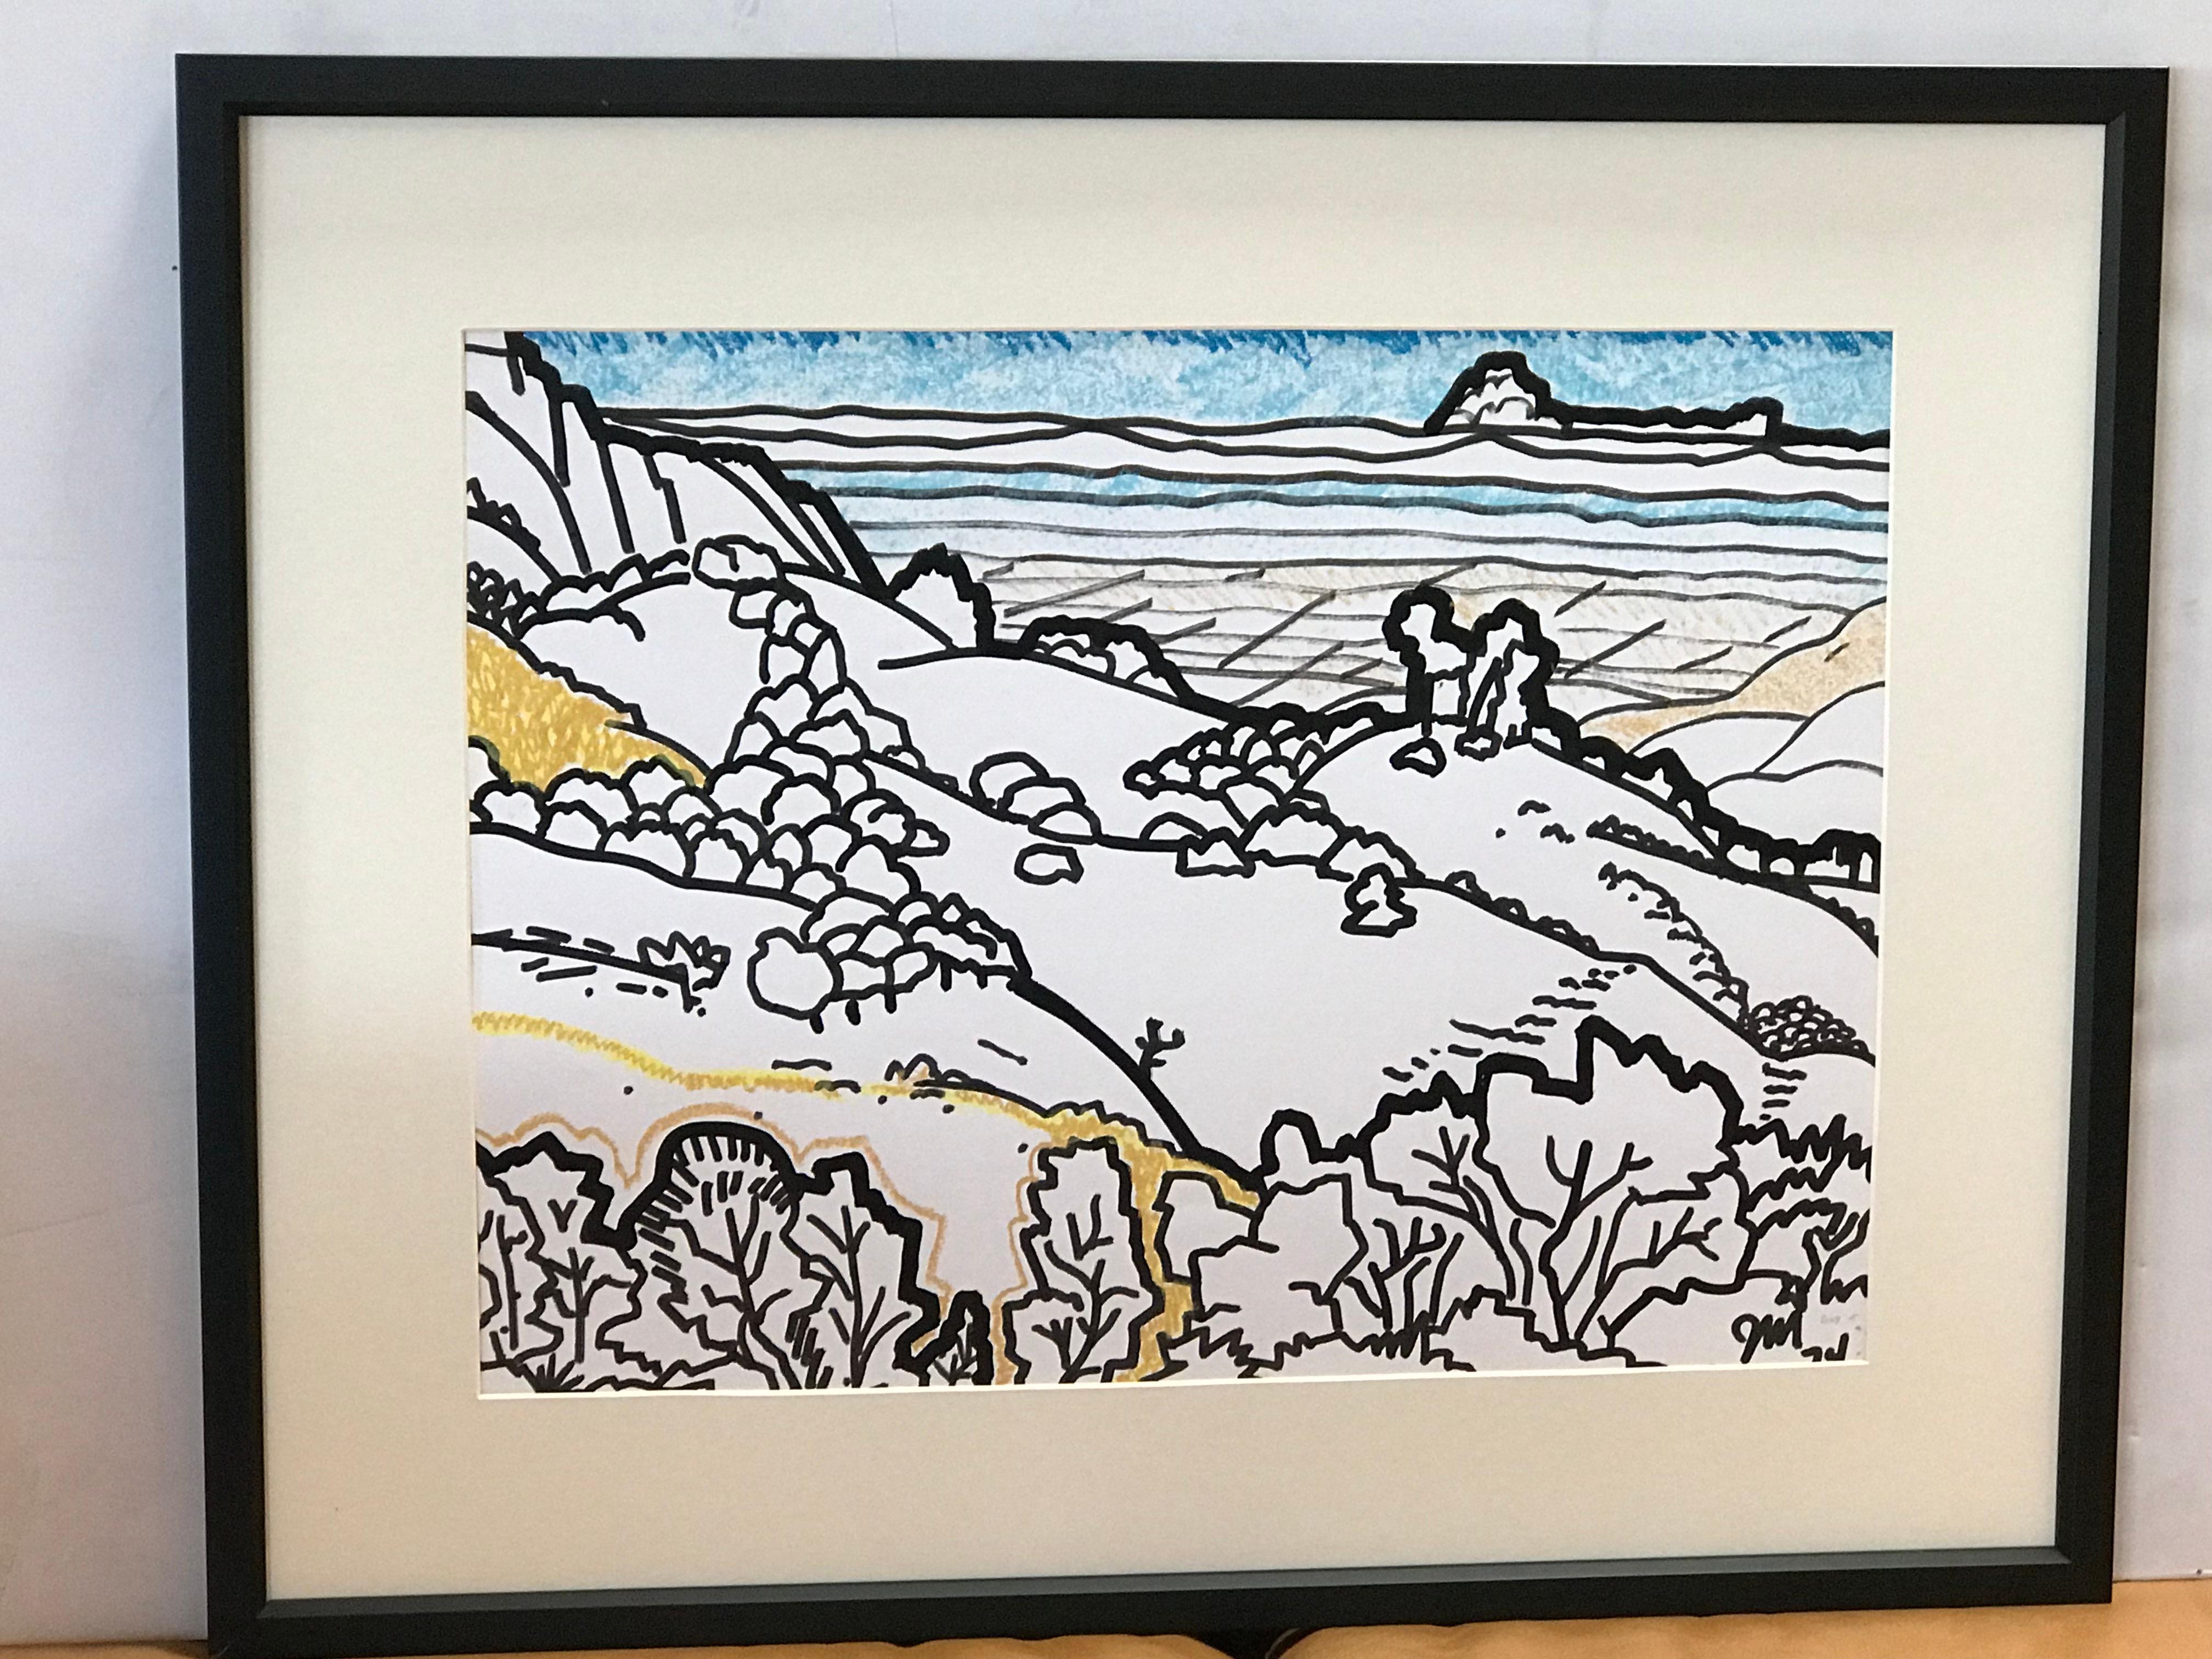 Framed serene landscape watercolor by James McCray (1912-1993), signed by the artist and dated 1976.
McCray taught at the California School of Fine Arts in San Francisco during the 1940's. He had solo and group exhibitions from 1935-1966. Among